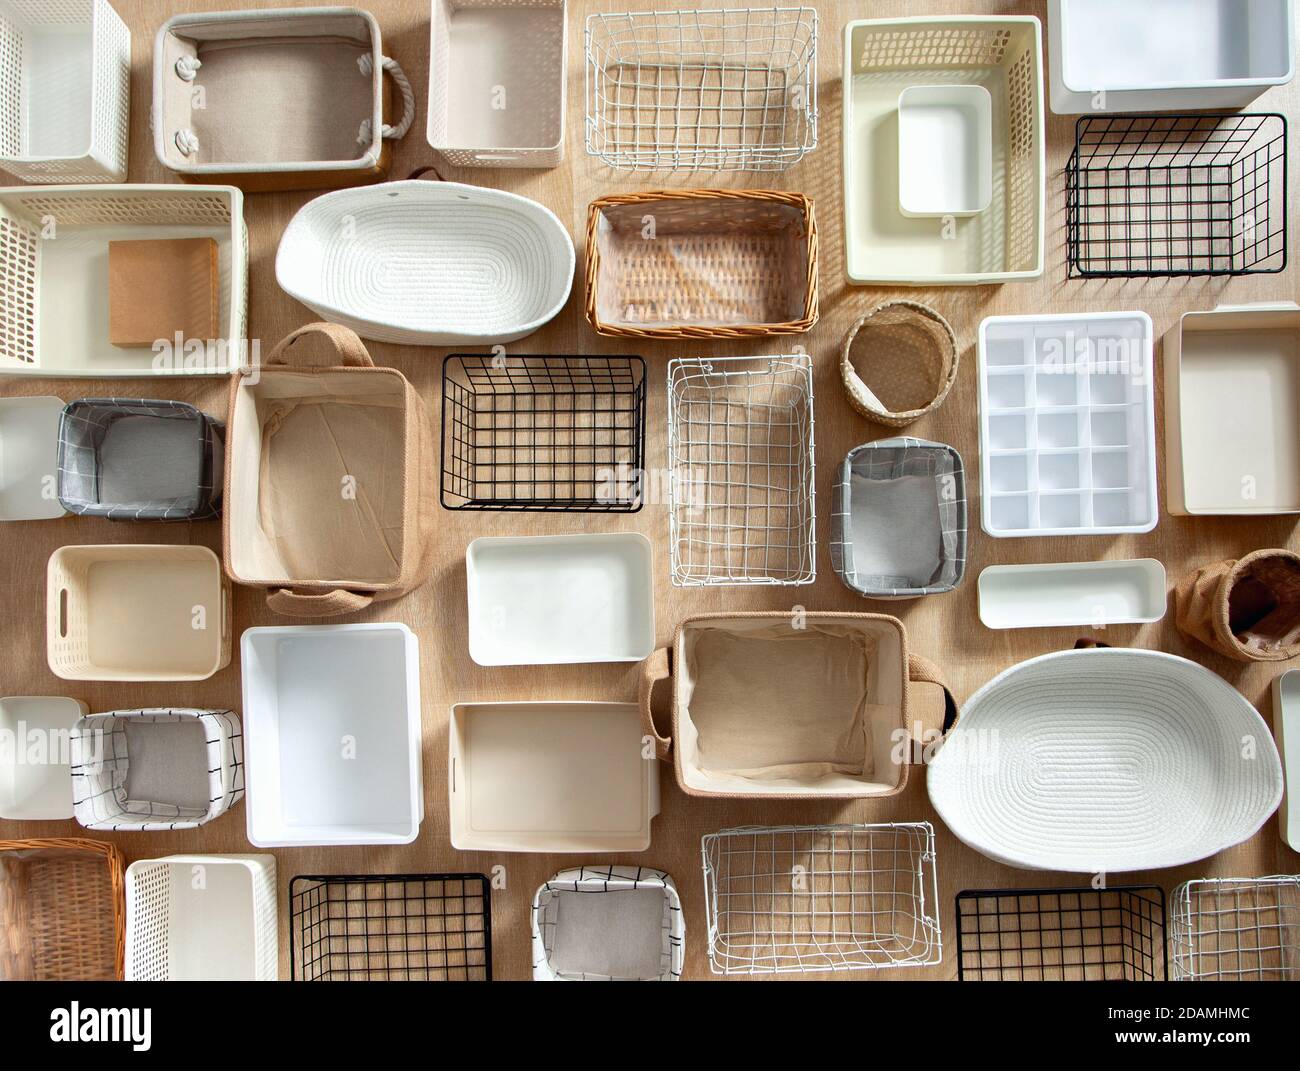 Top view of closet organization boxes and steel wire baskets in different  shapes Stock Photo - Alamy